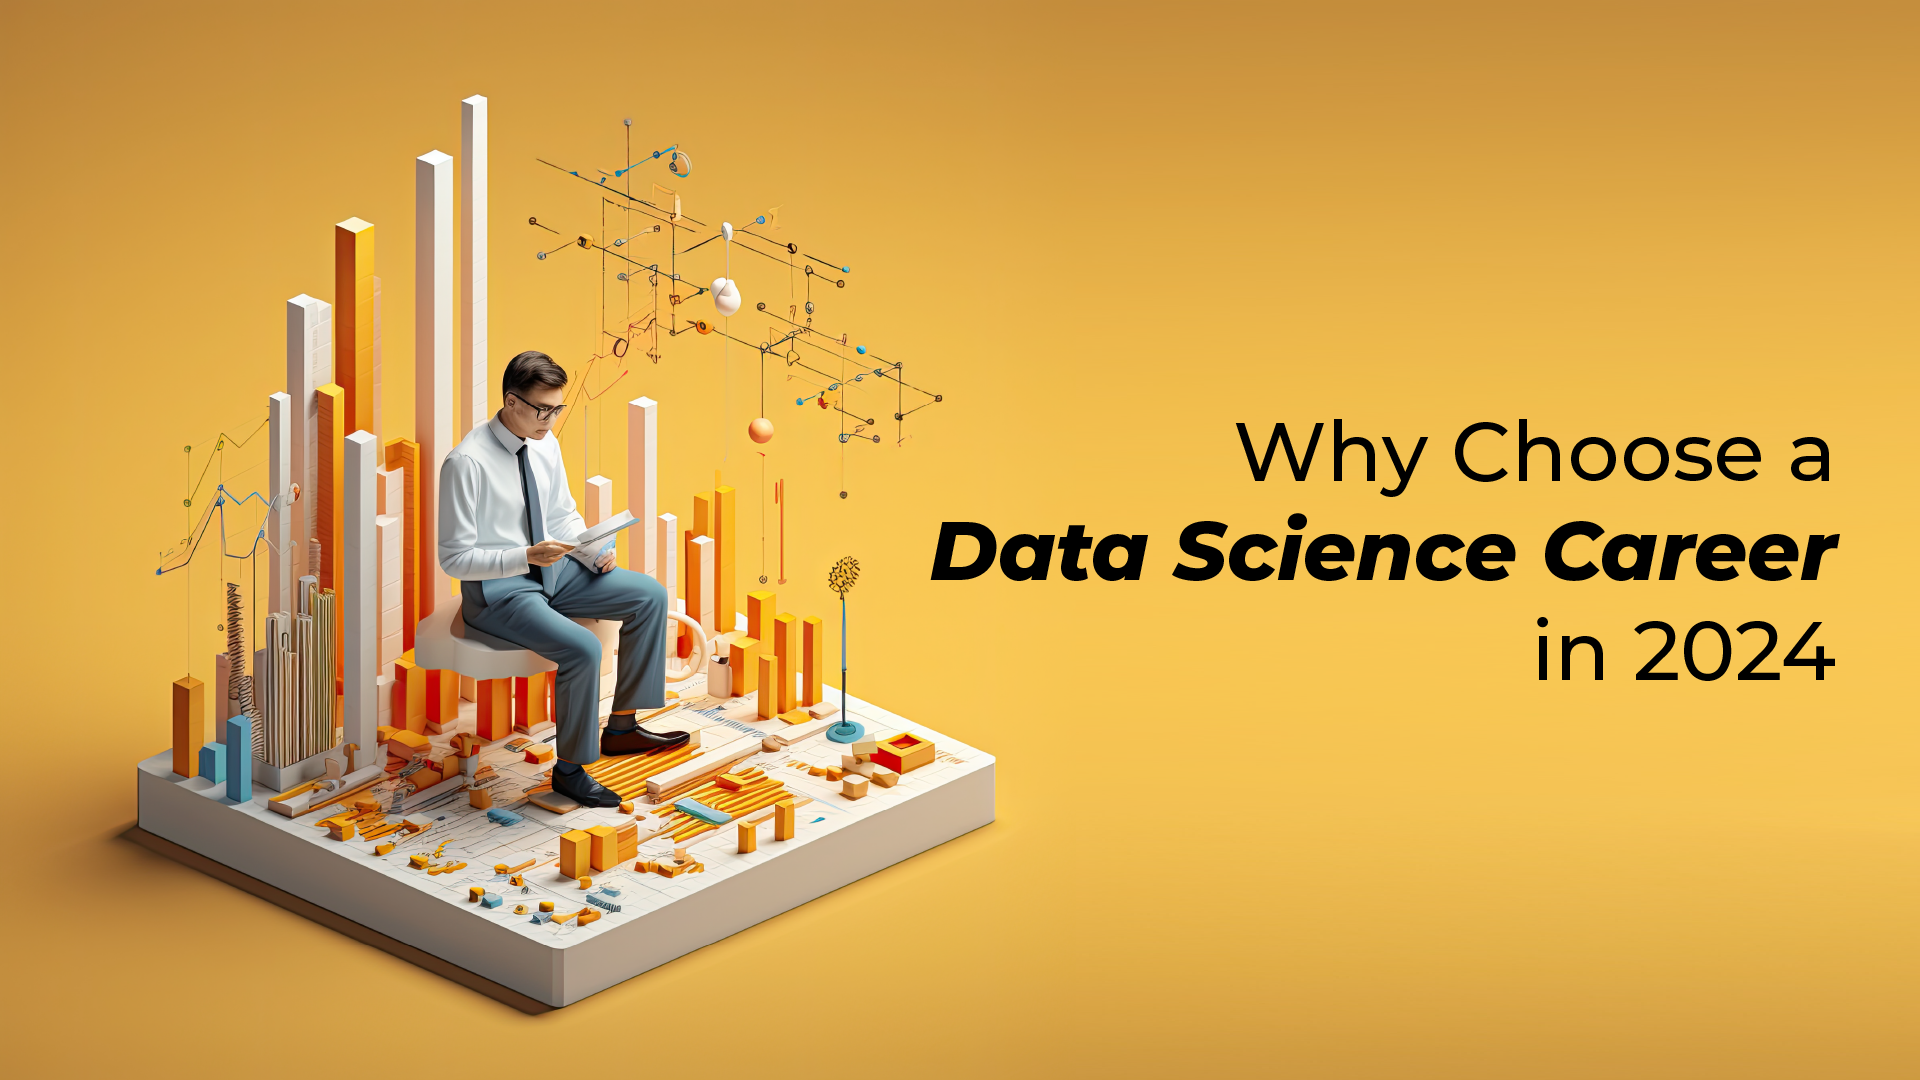 Why Choose Data Science in 2024